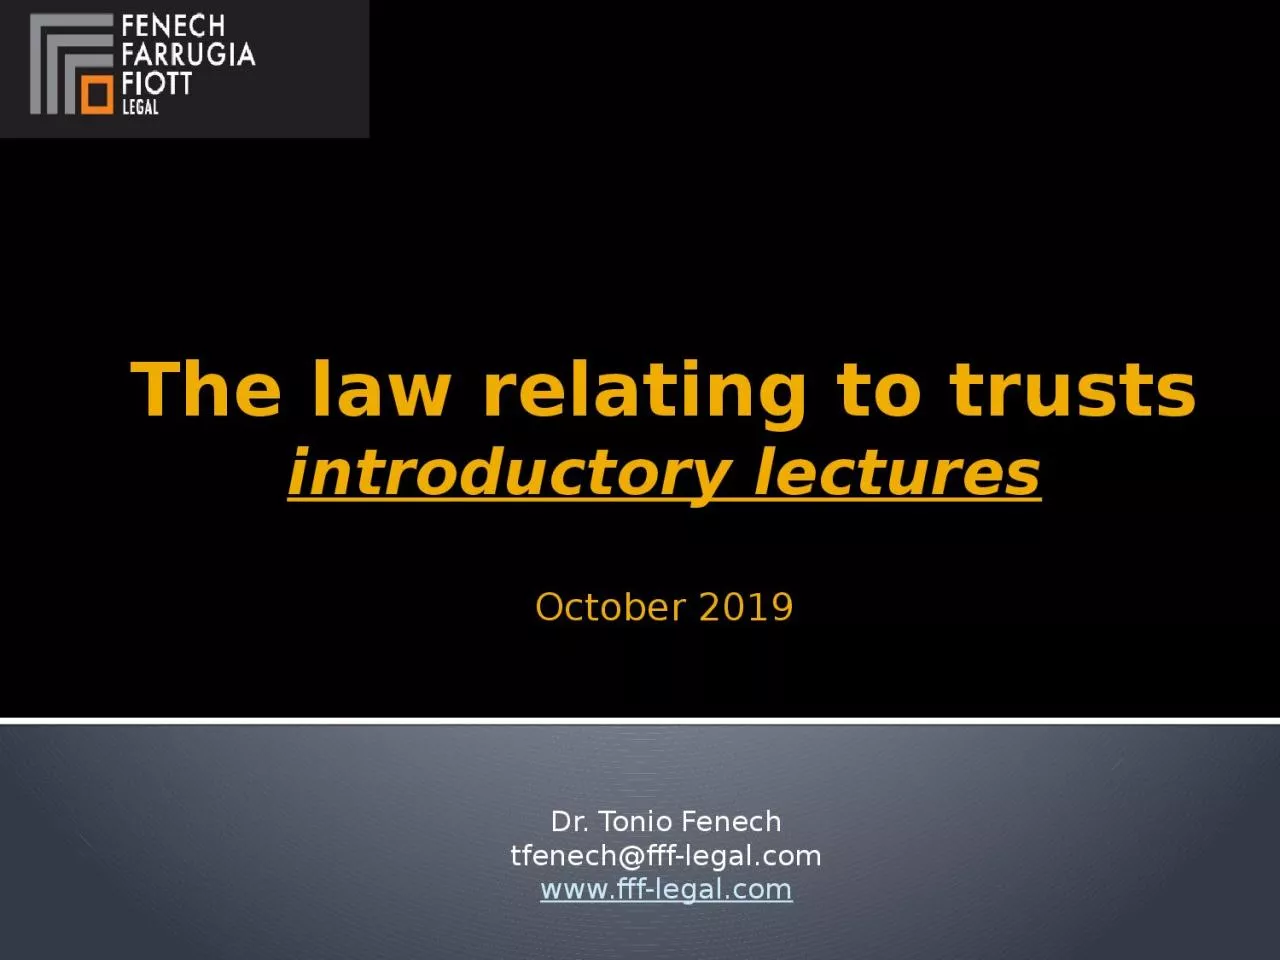 The law relating to trusts